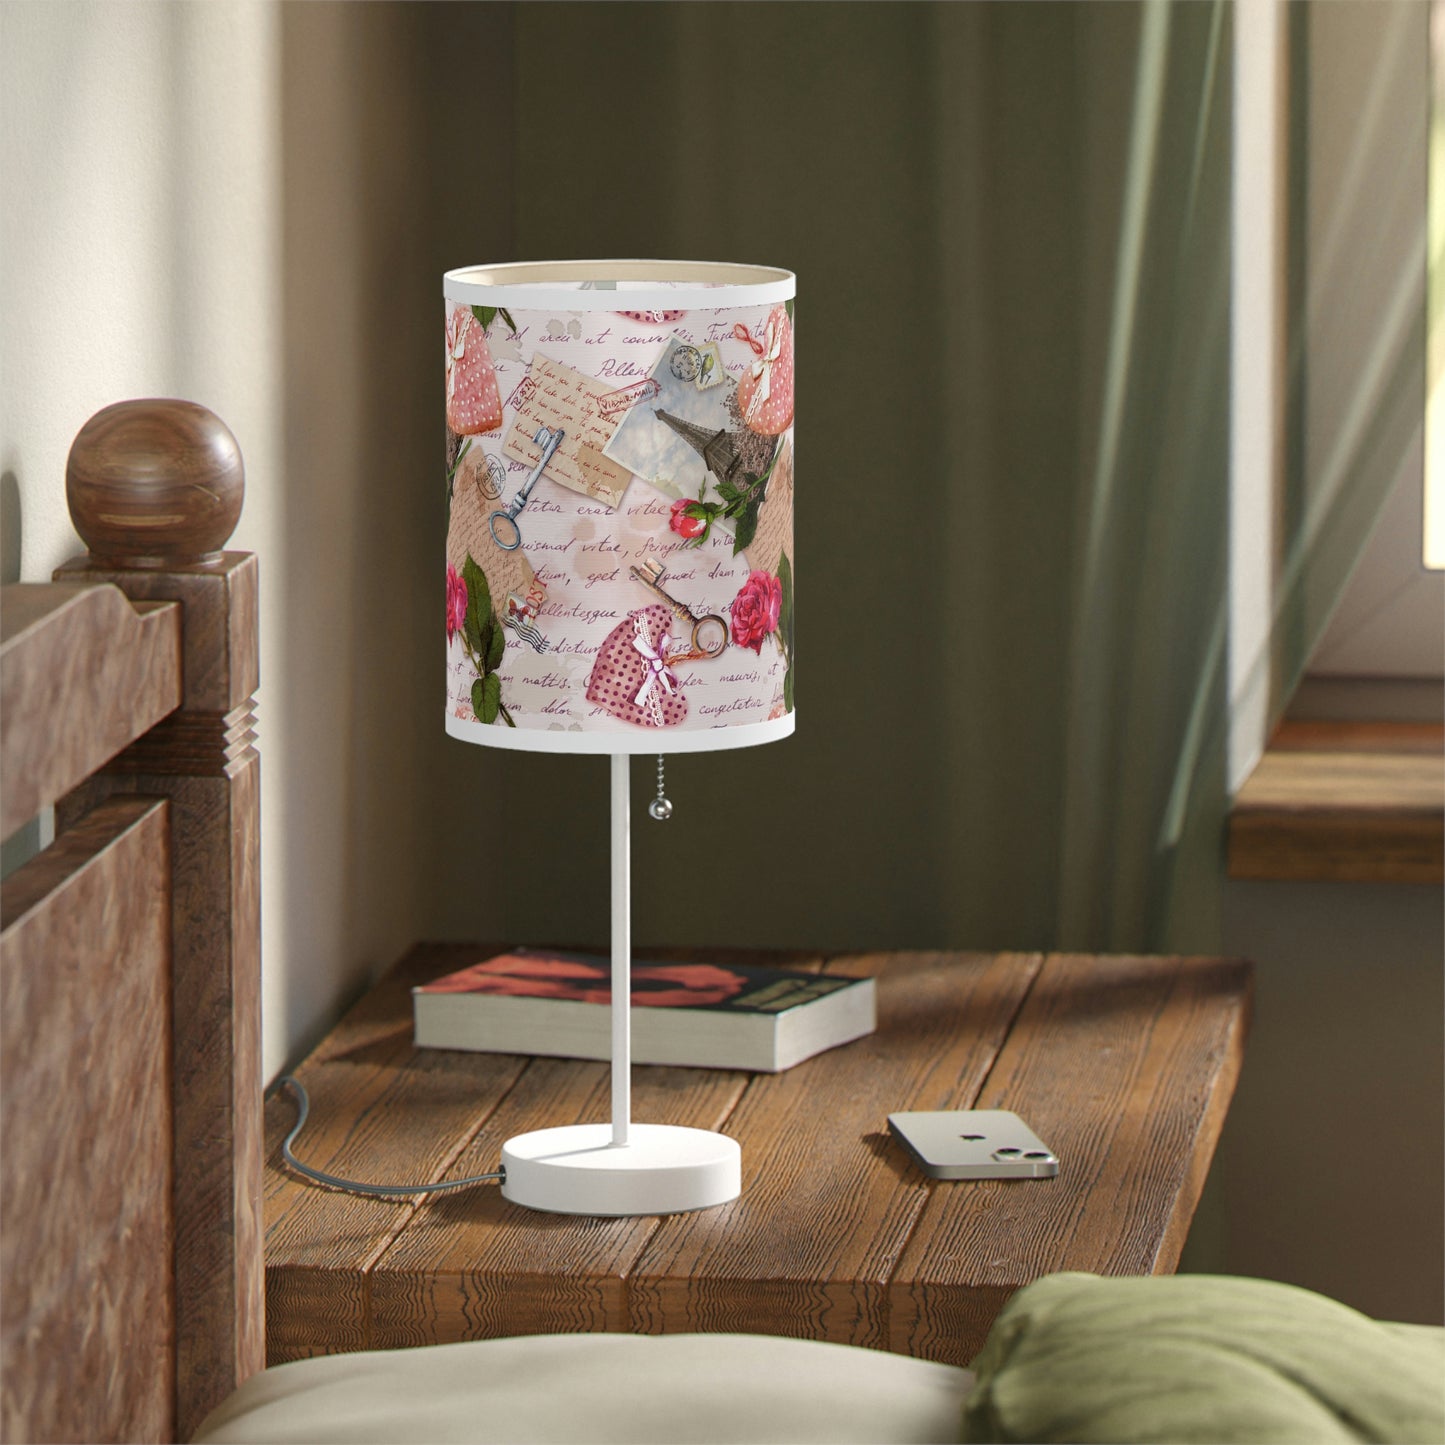 Paris Love Letters Lamp on a Stand, US|CA plug